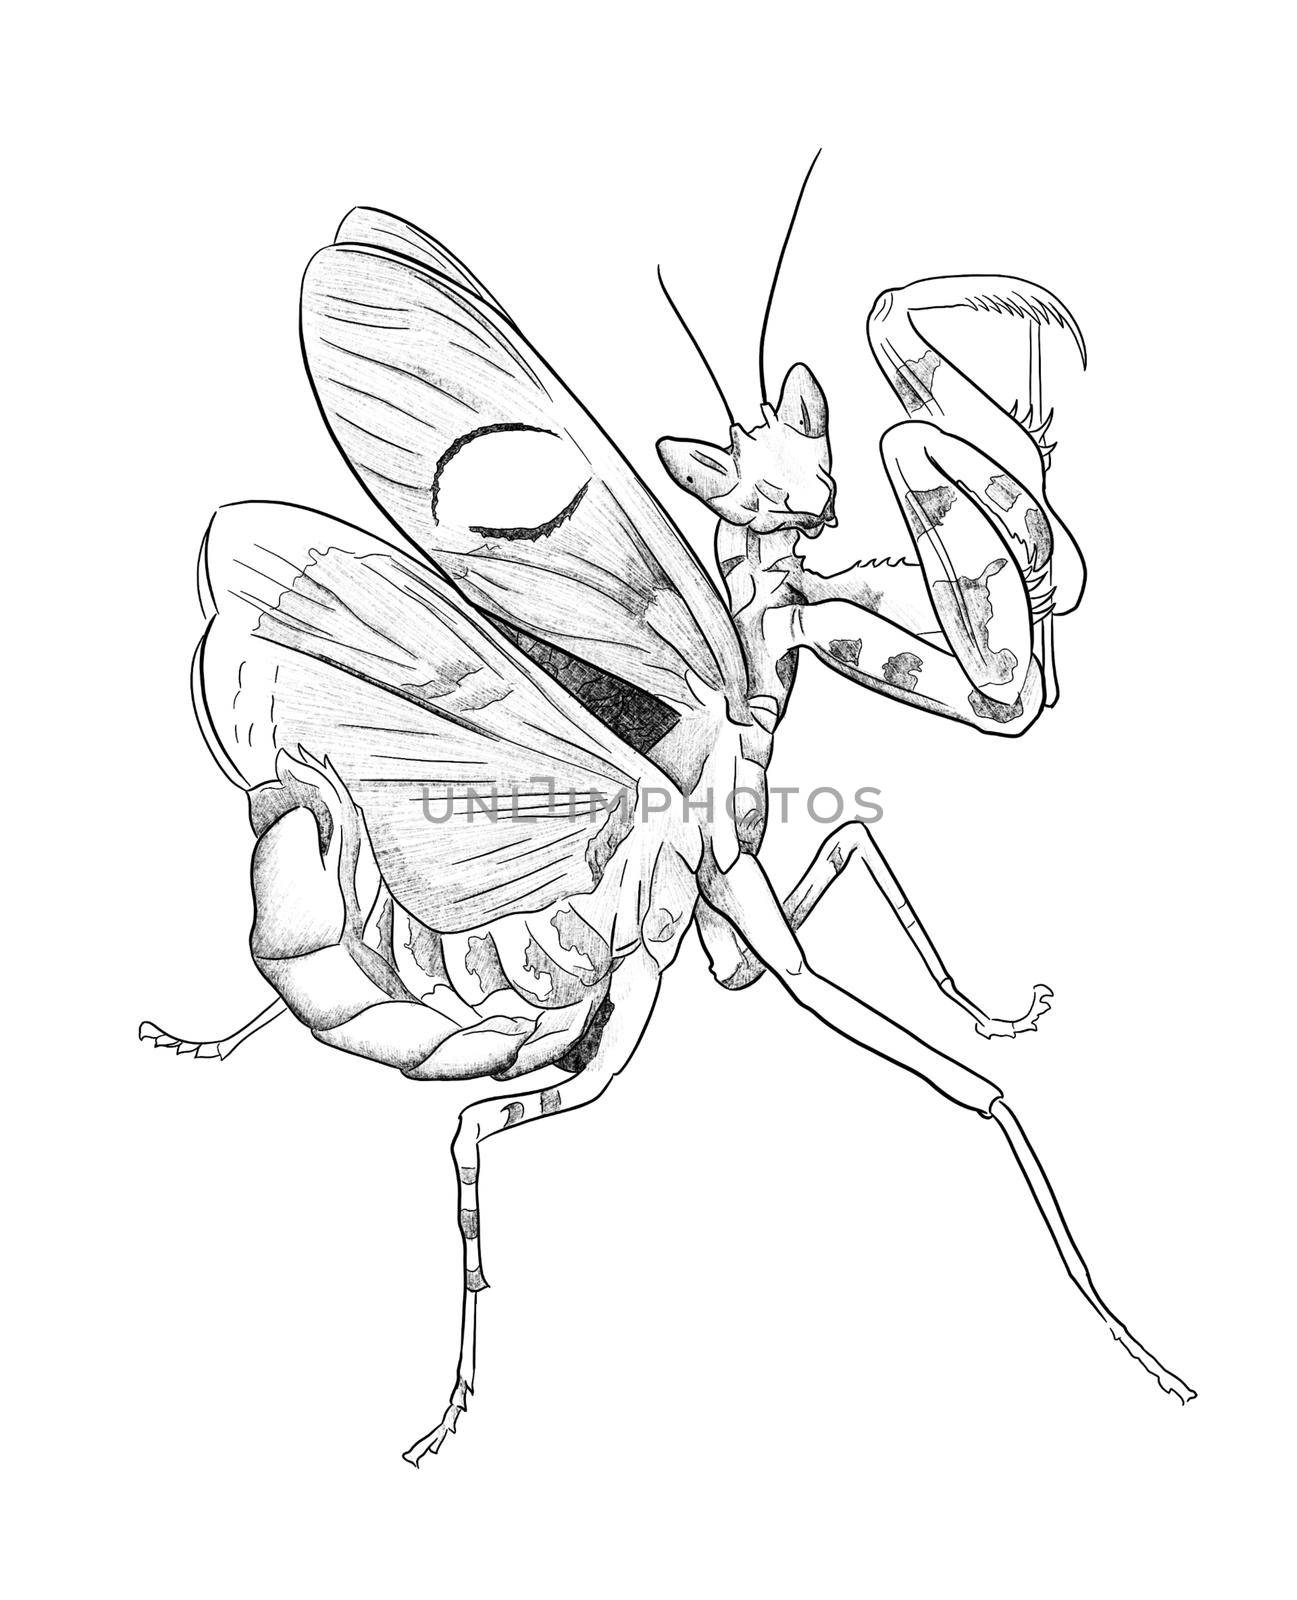 pencil drawing of a praying mantis with paws up illustration